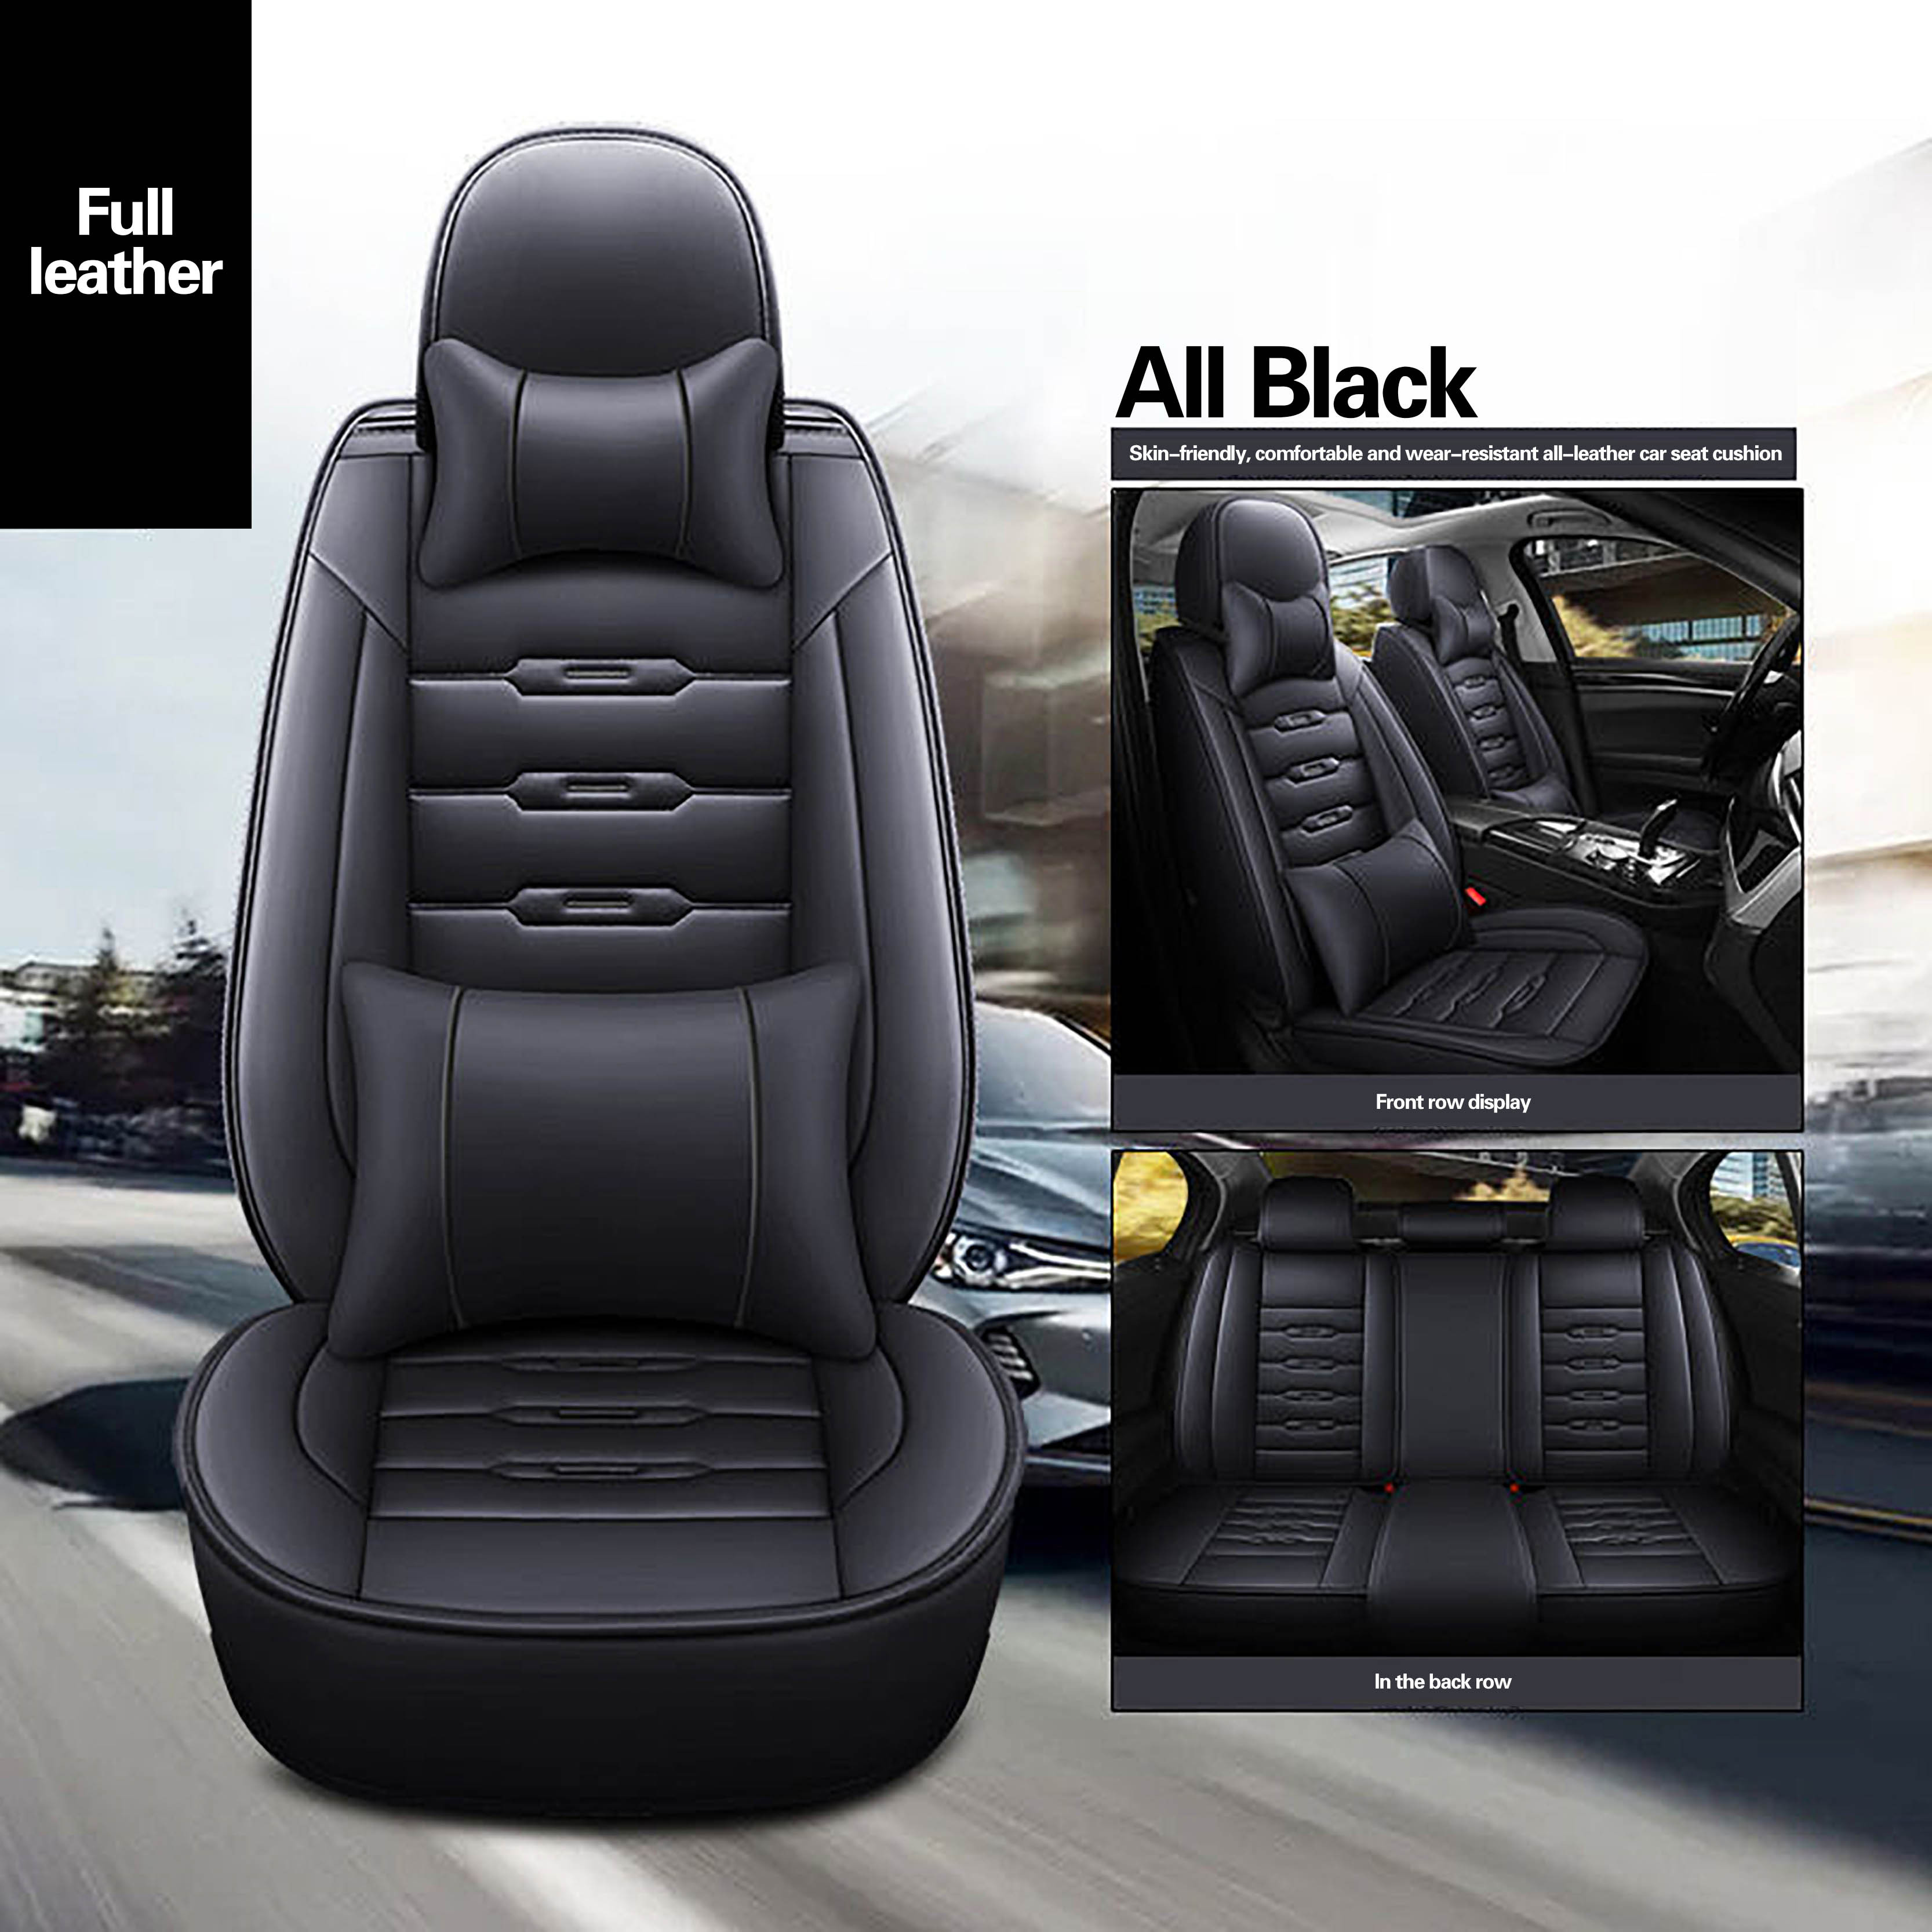 Waterproof Rear Car Seat Cover, All vehicle models